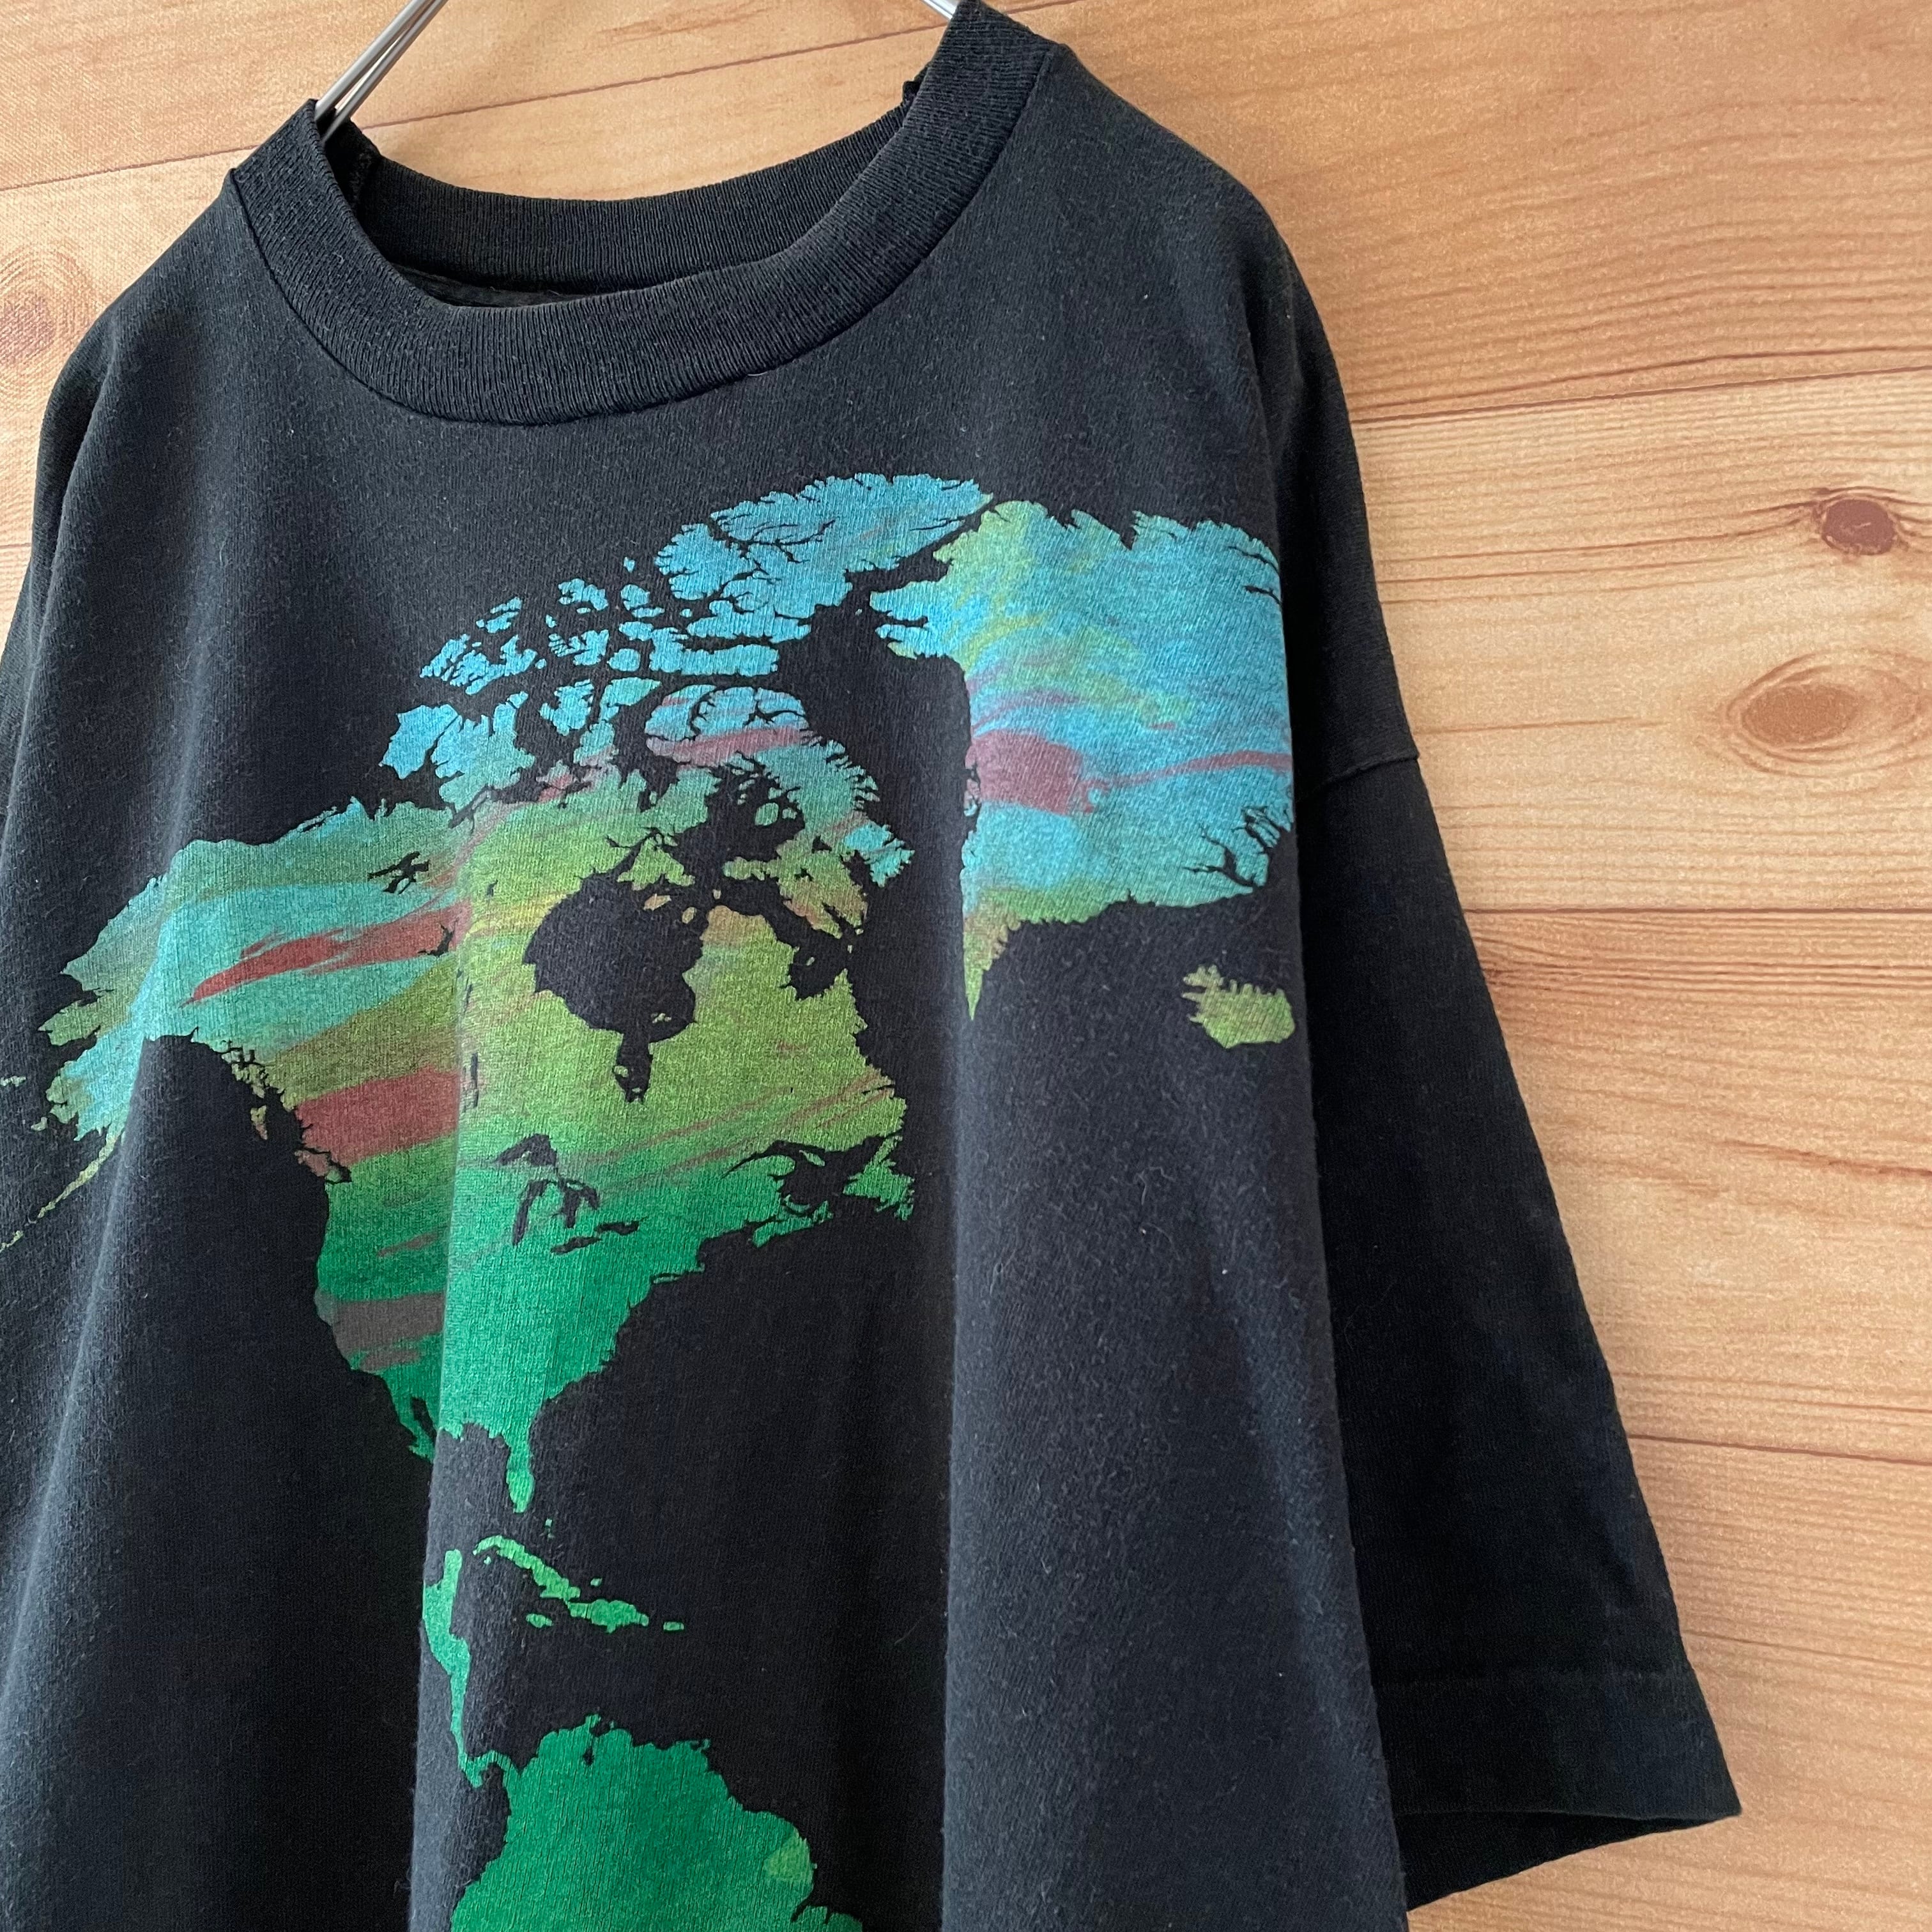 90s USA製 地図柄 アメリカ バージン諸島 プリント Tシャツ